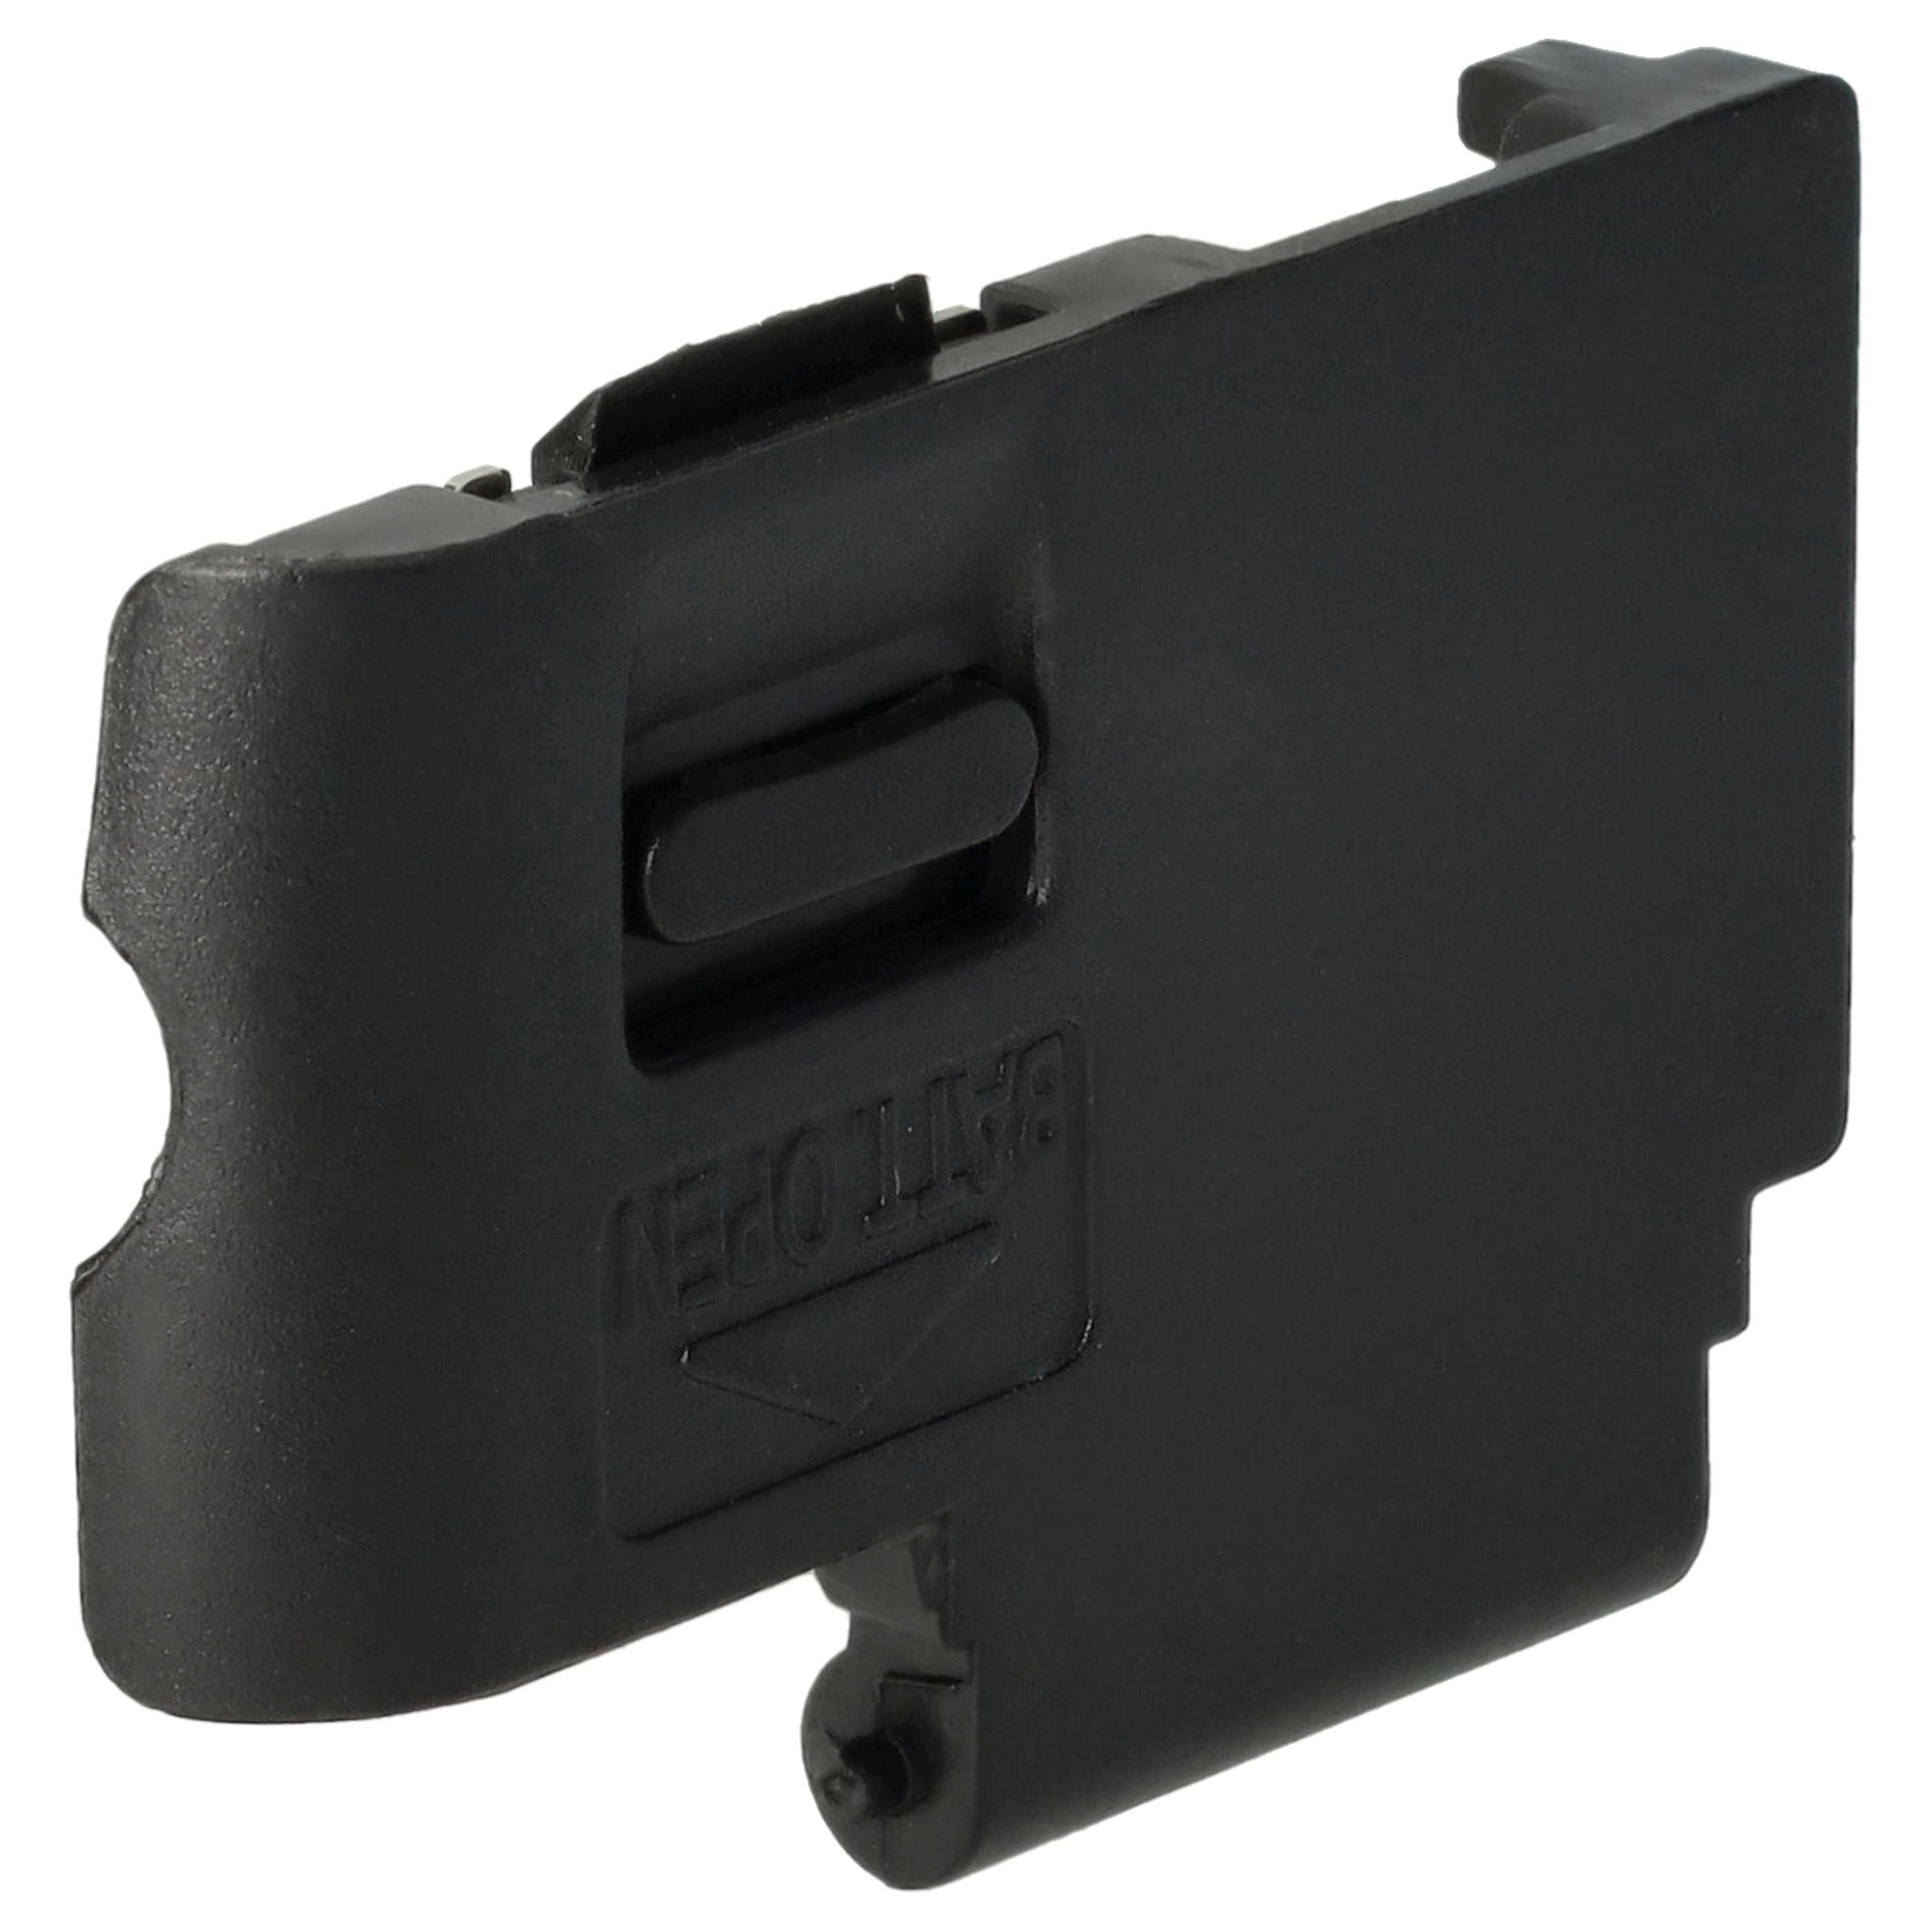 Battery Door Cover suitable for Canon EOS 350D, 400D, Rebel XTI, Kiss Digital X Camera, Battery Grip